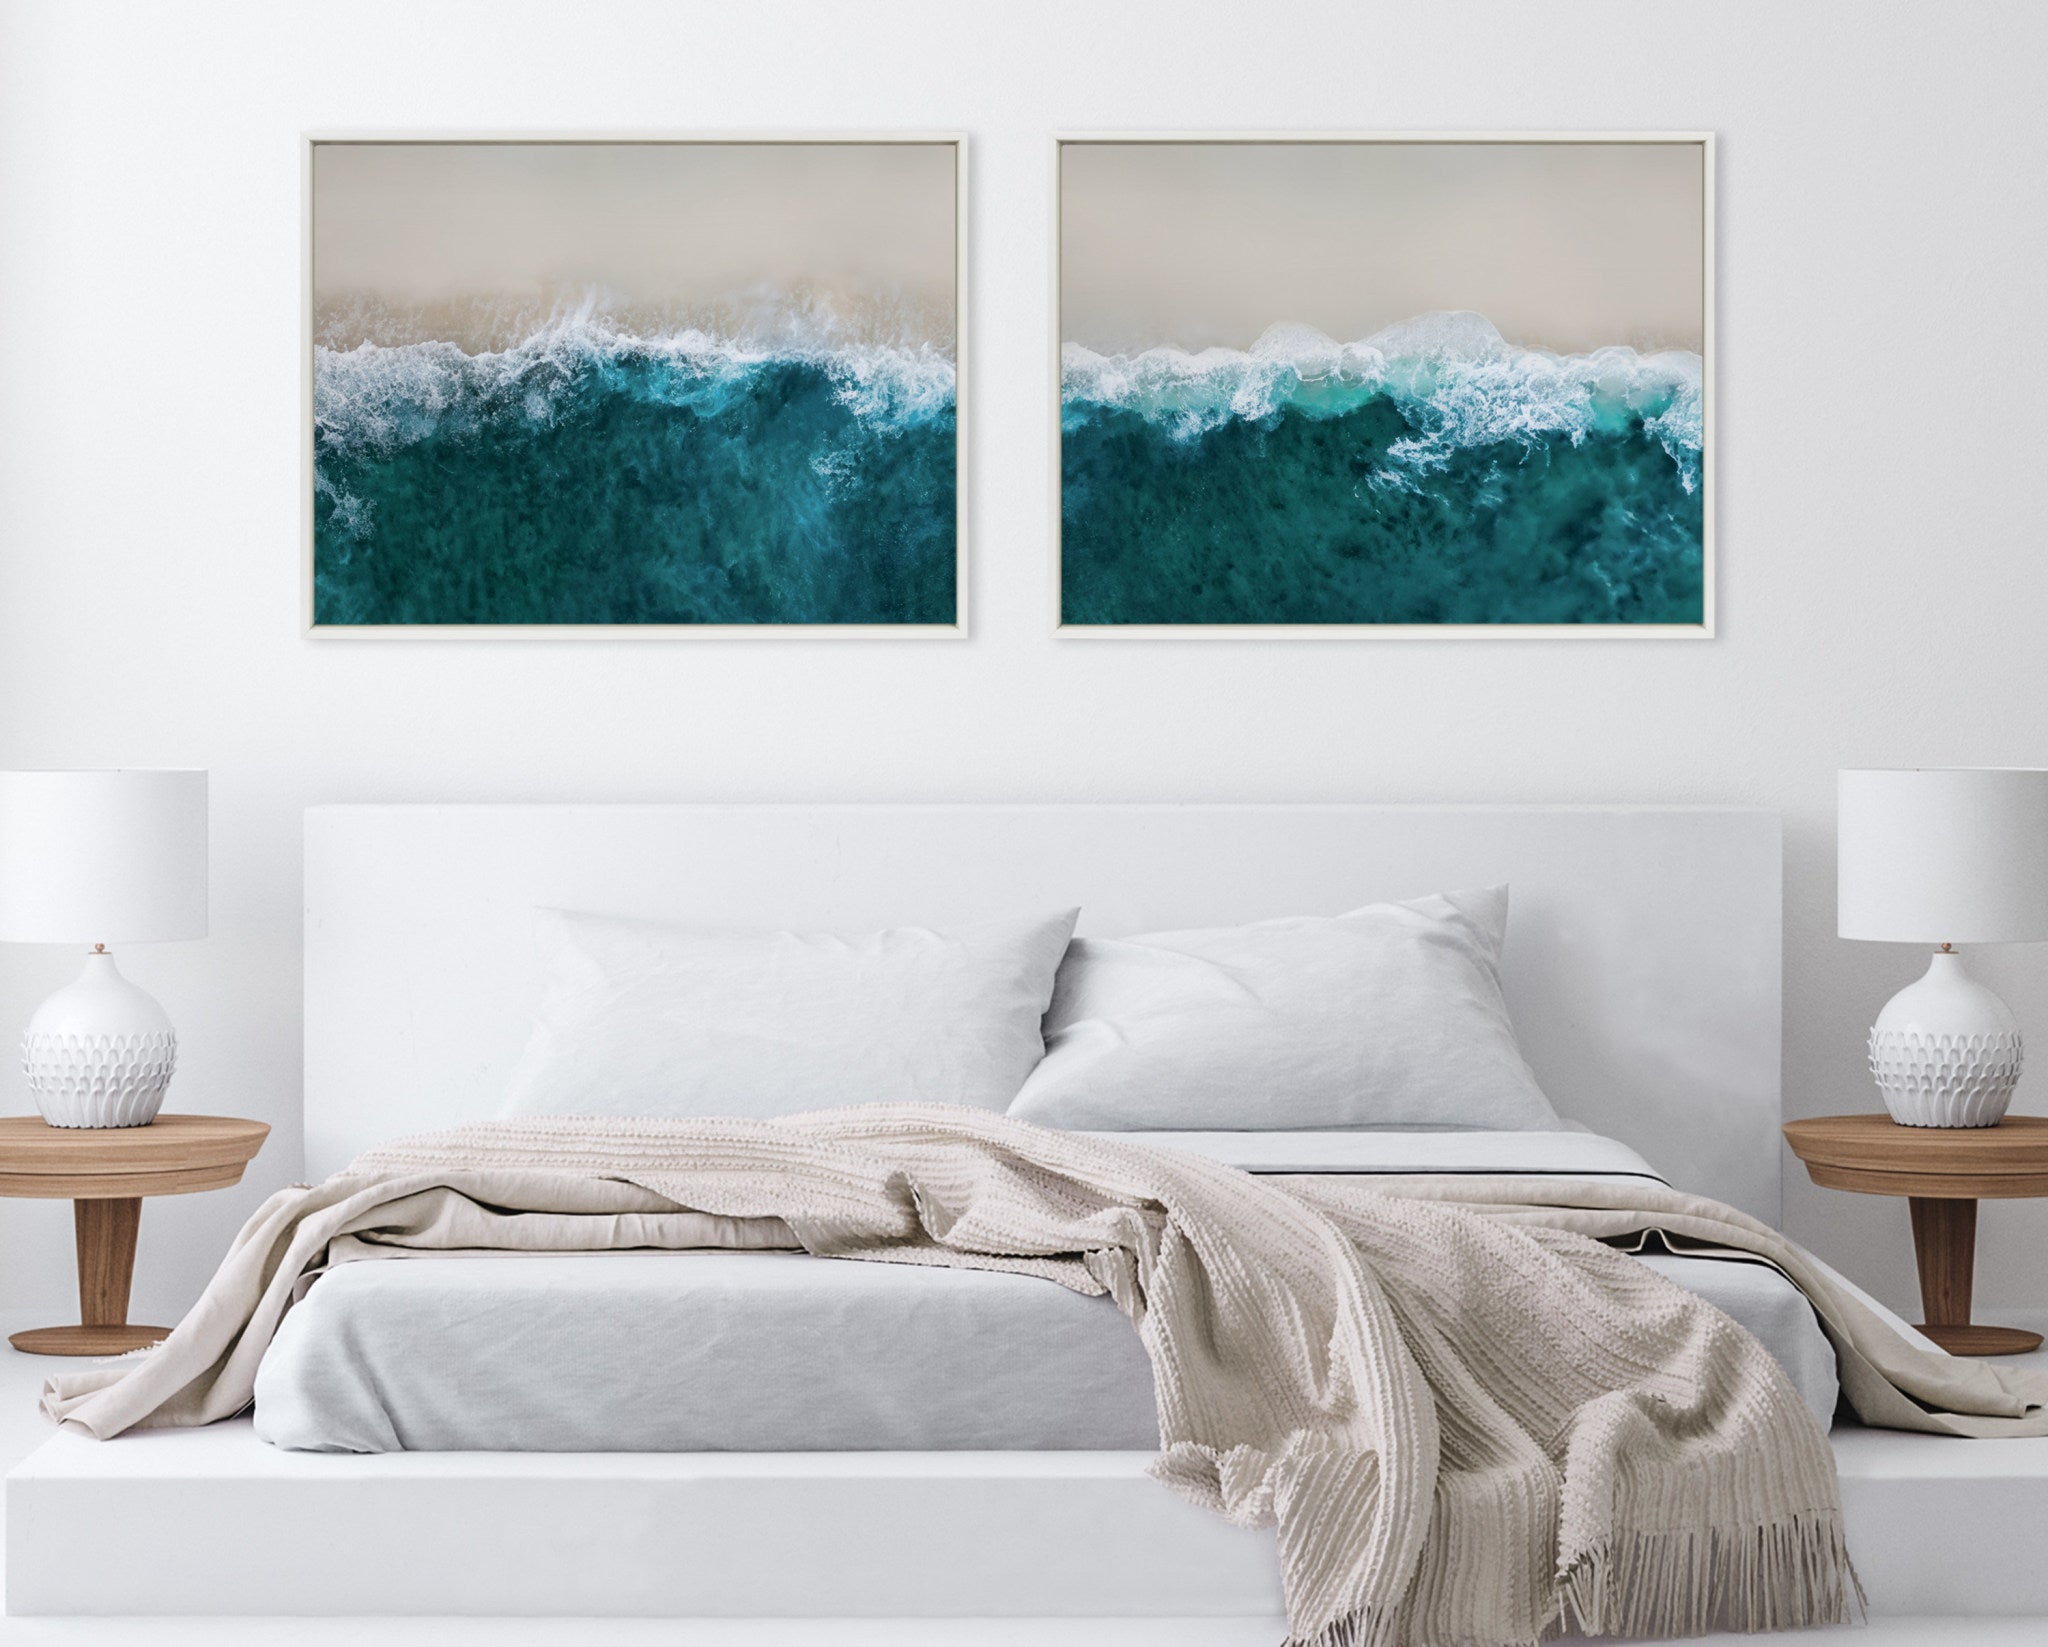 Sylvie Waves Crashing on the Beach 1 and 2 Framed Canvas Art Set by The Creative Bunch Studio